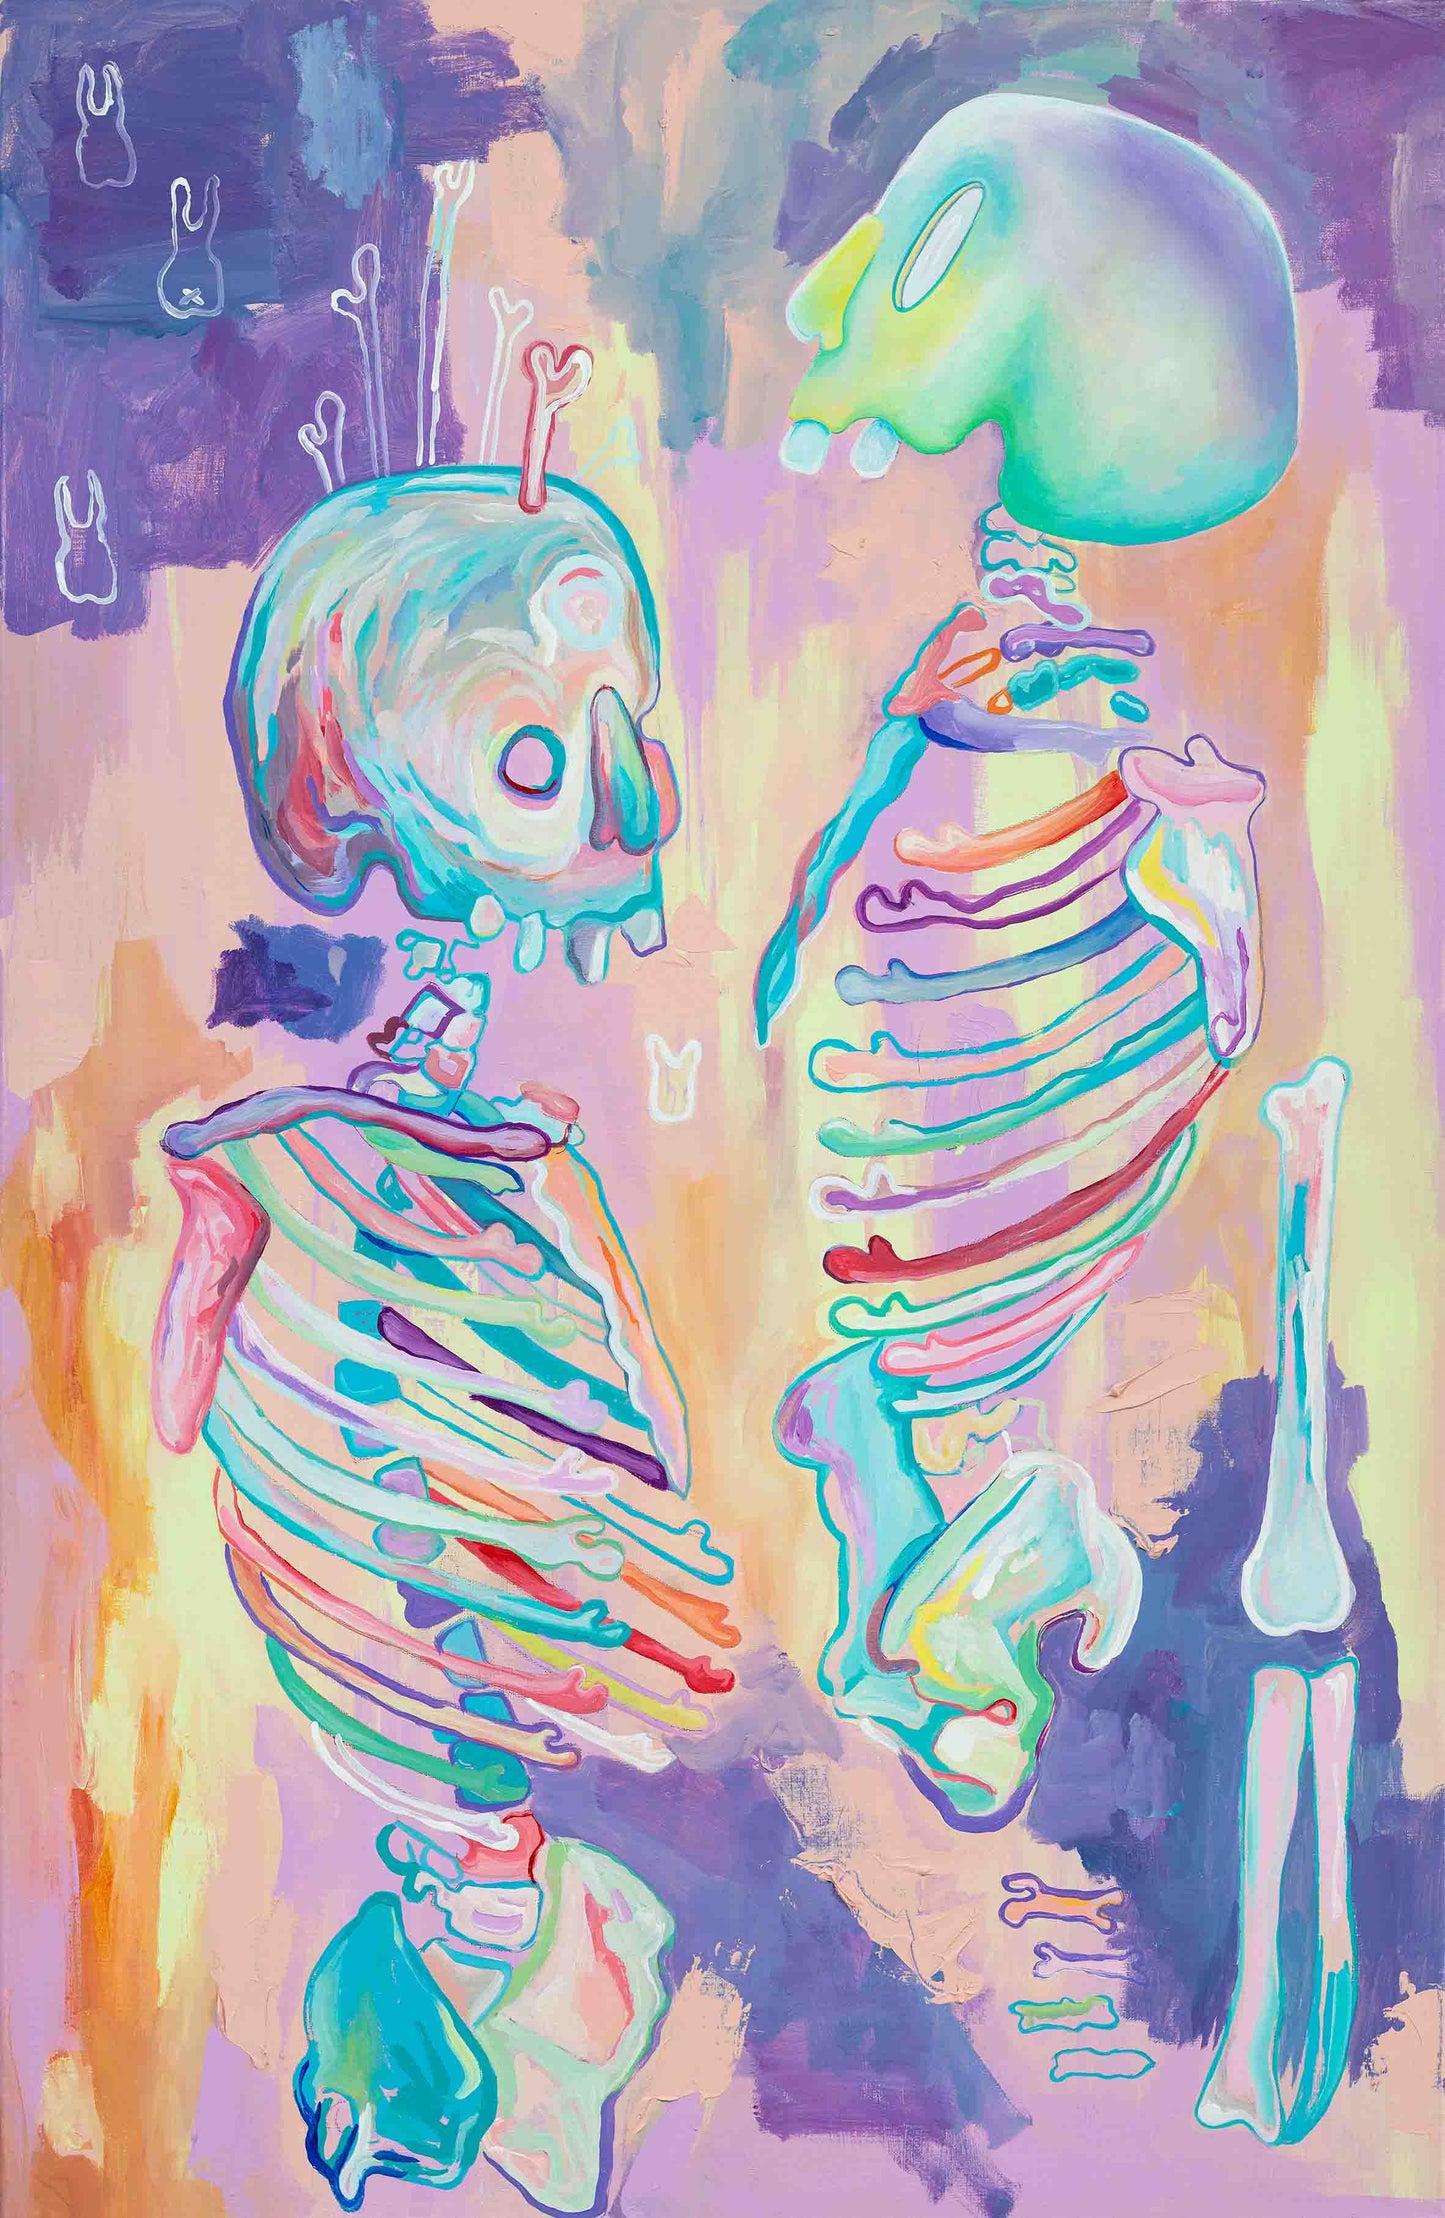 Skeletons/Connect Giclee print